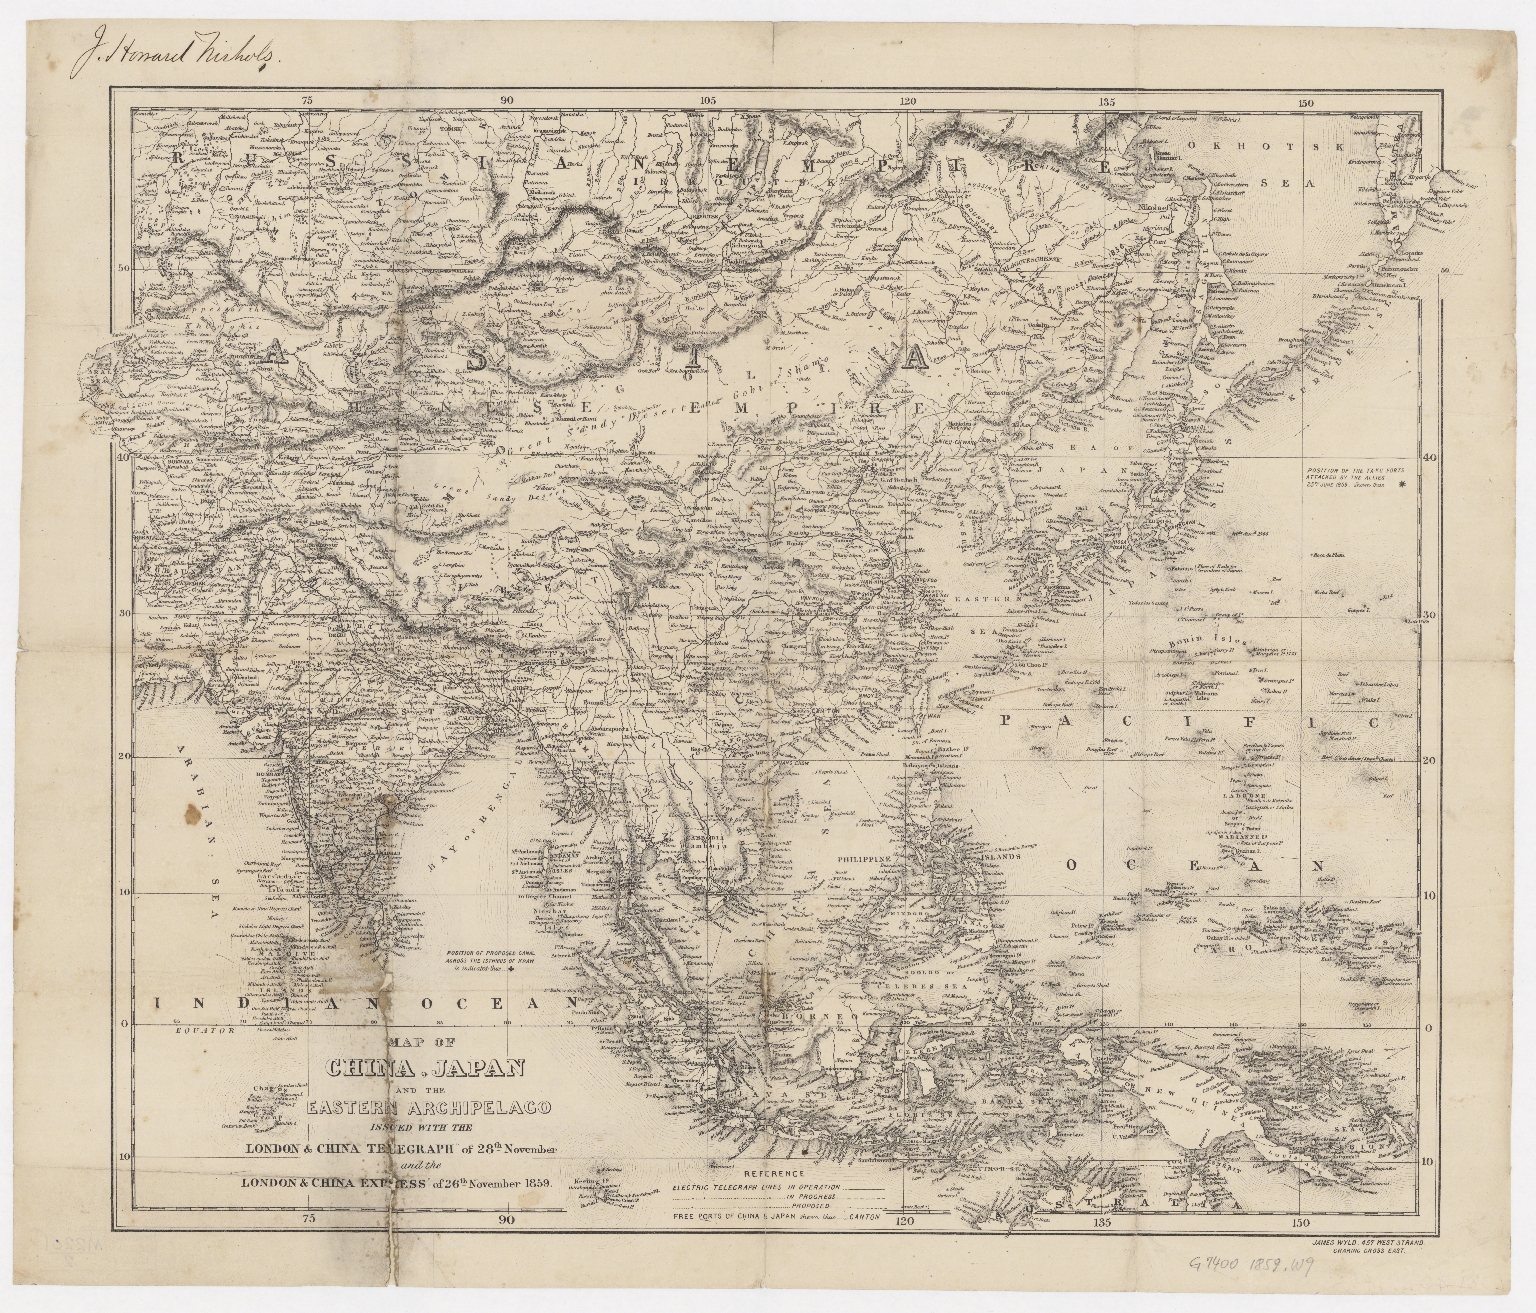 Map of China, Japan and the eastern archipelago : issued with the London & China Telegraph of 28th November and the London & China Express of 26th November 1859